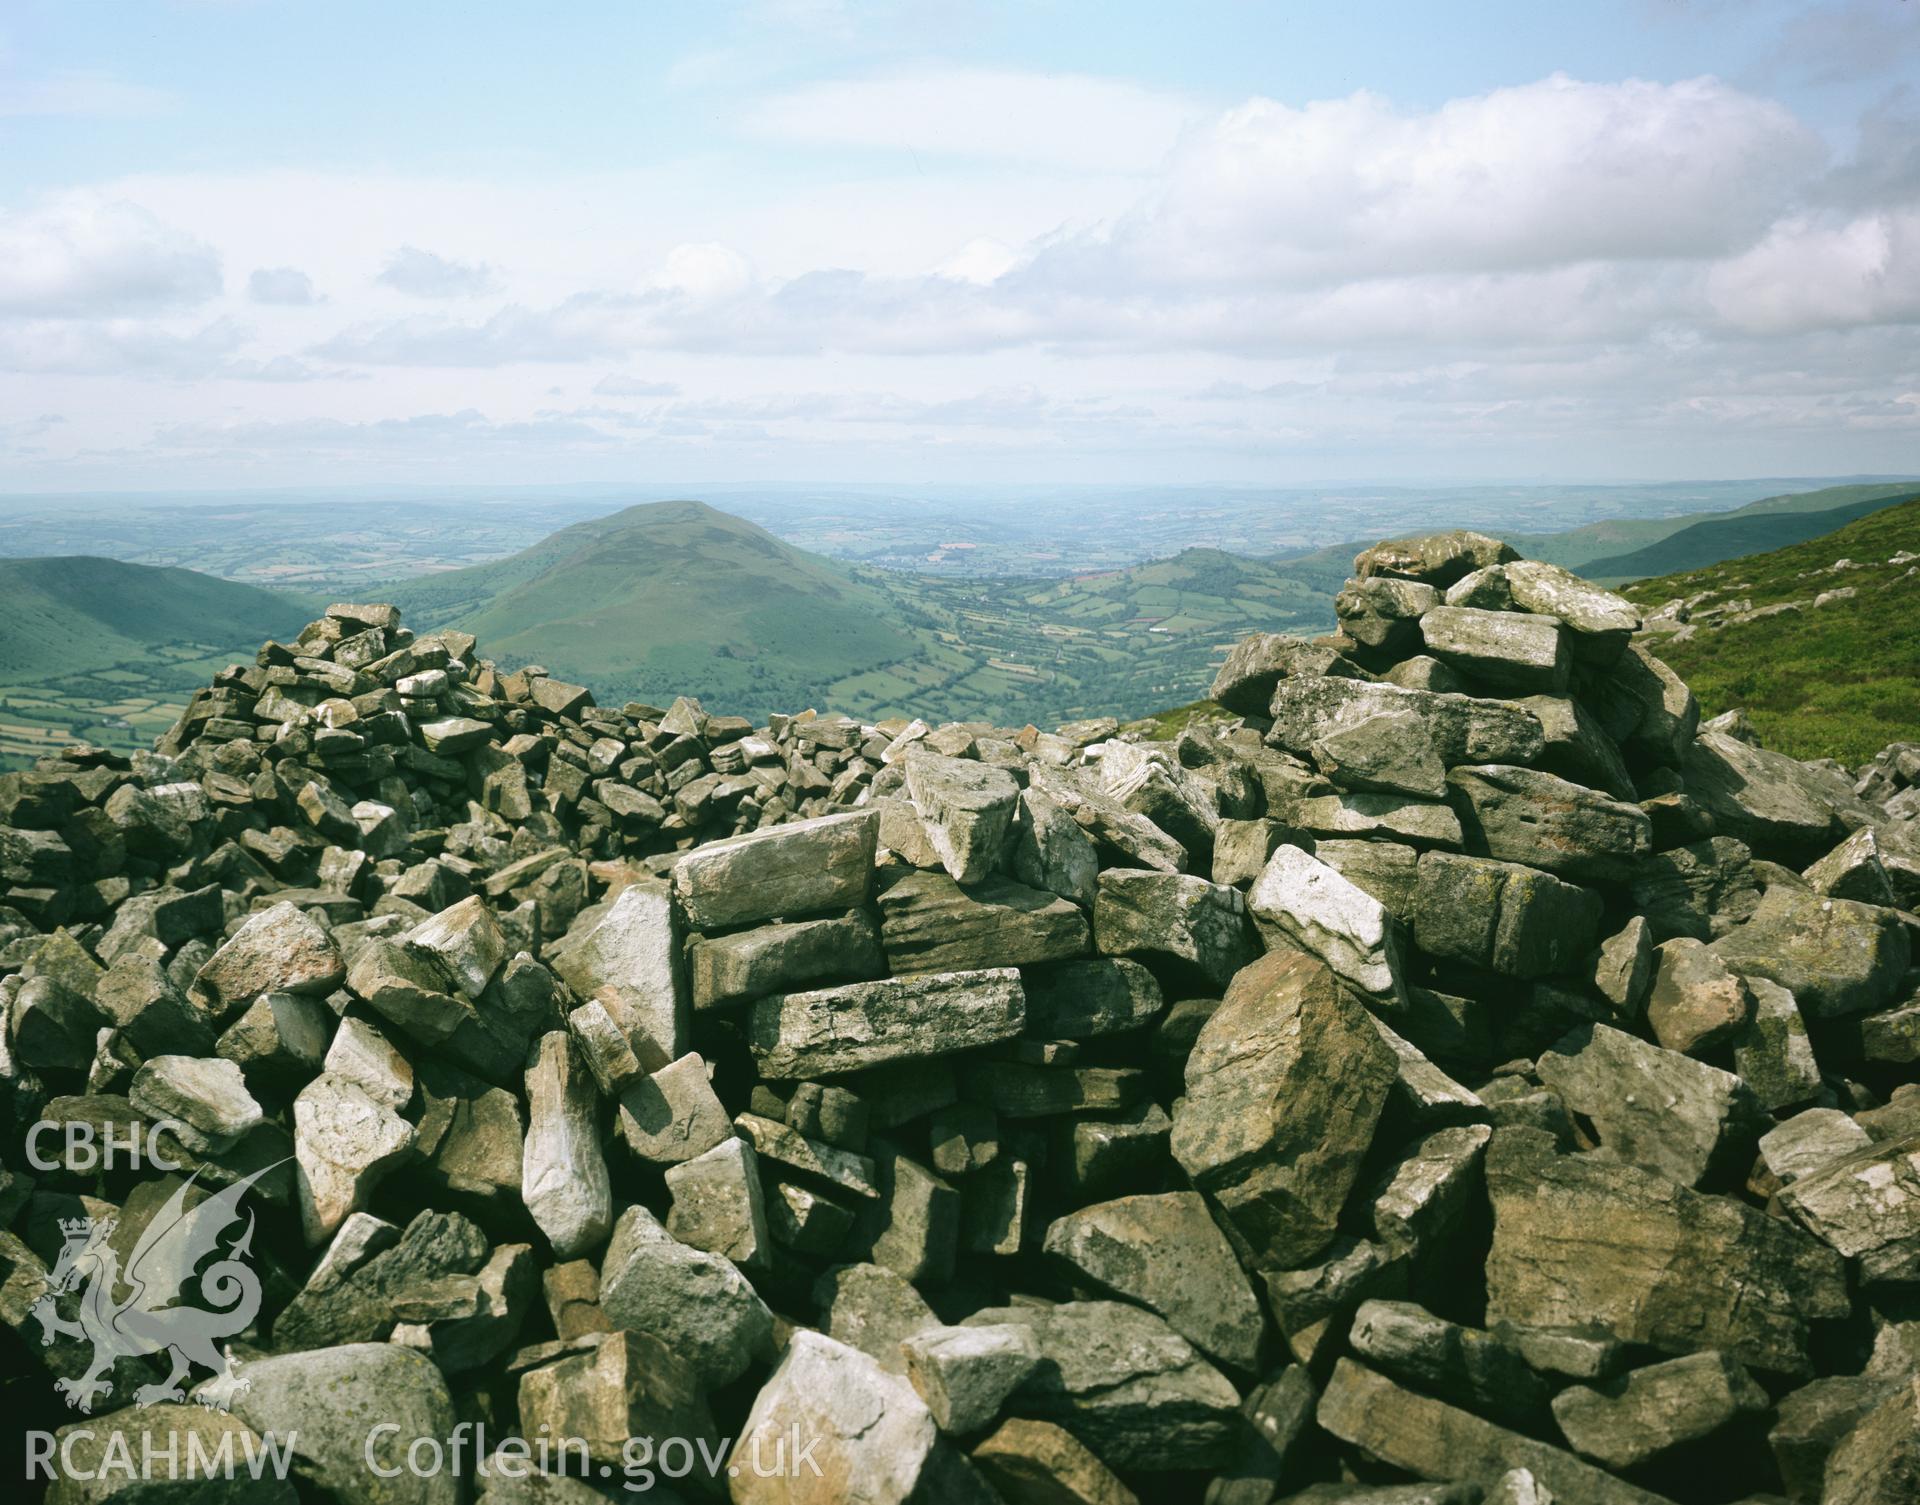 RCAHMW colour transparency showing cairn at Pen Allt Mawr, taken by RCAHMW 1981